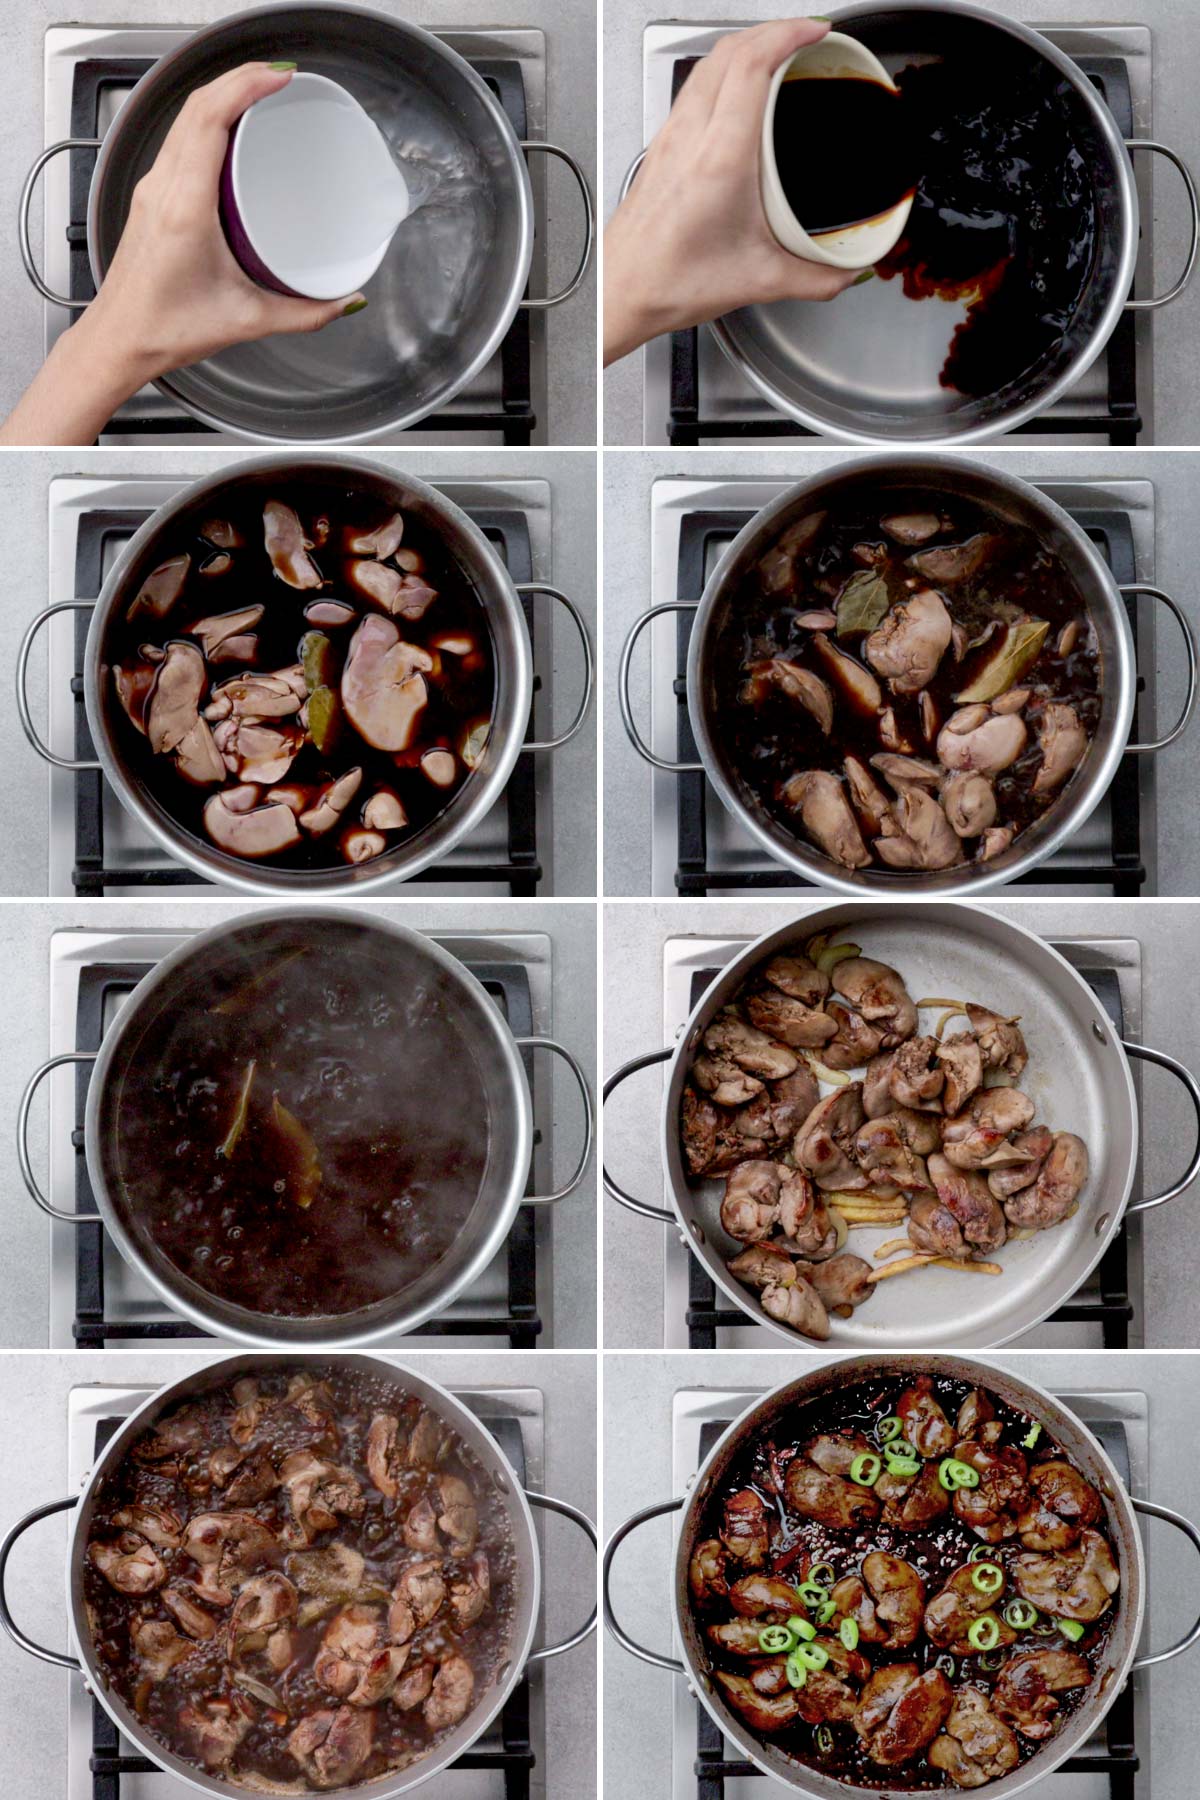 Steps on how to cook Adobong Atay ng Manok.